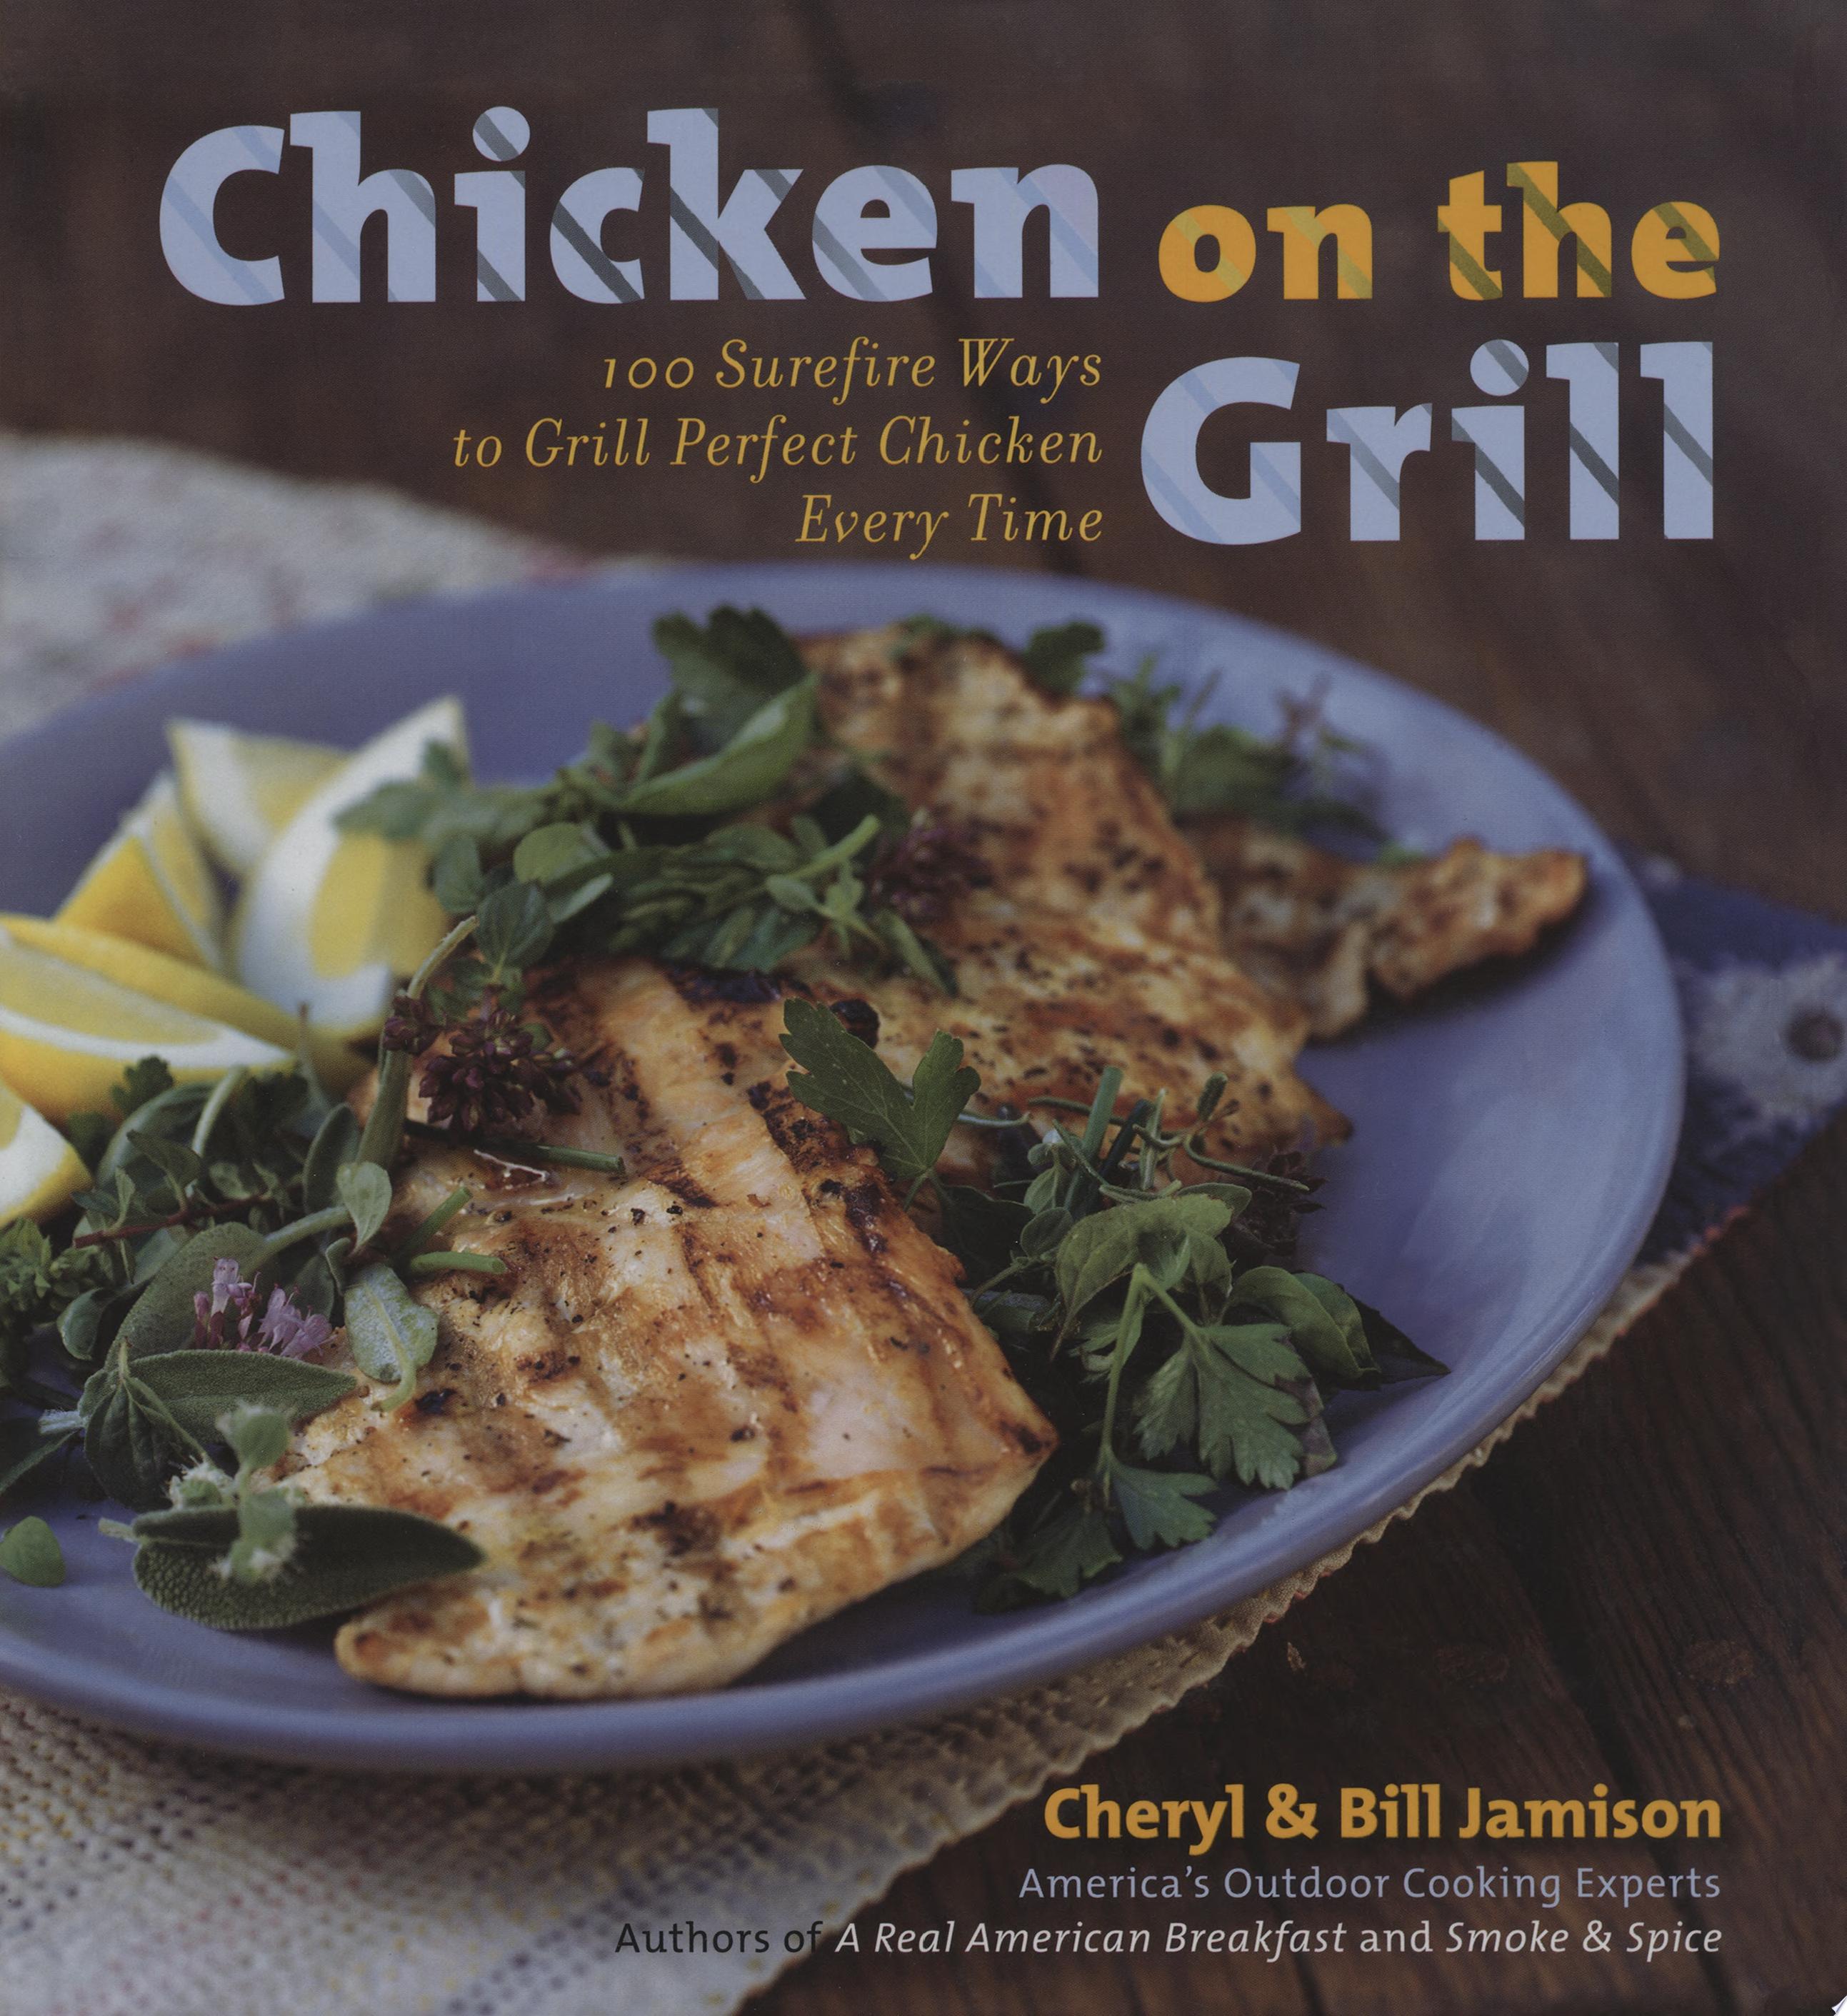 Image for "Chicken on the Grill"